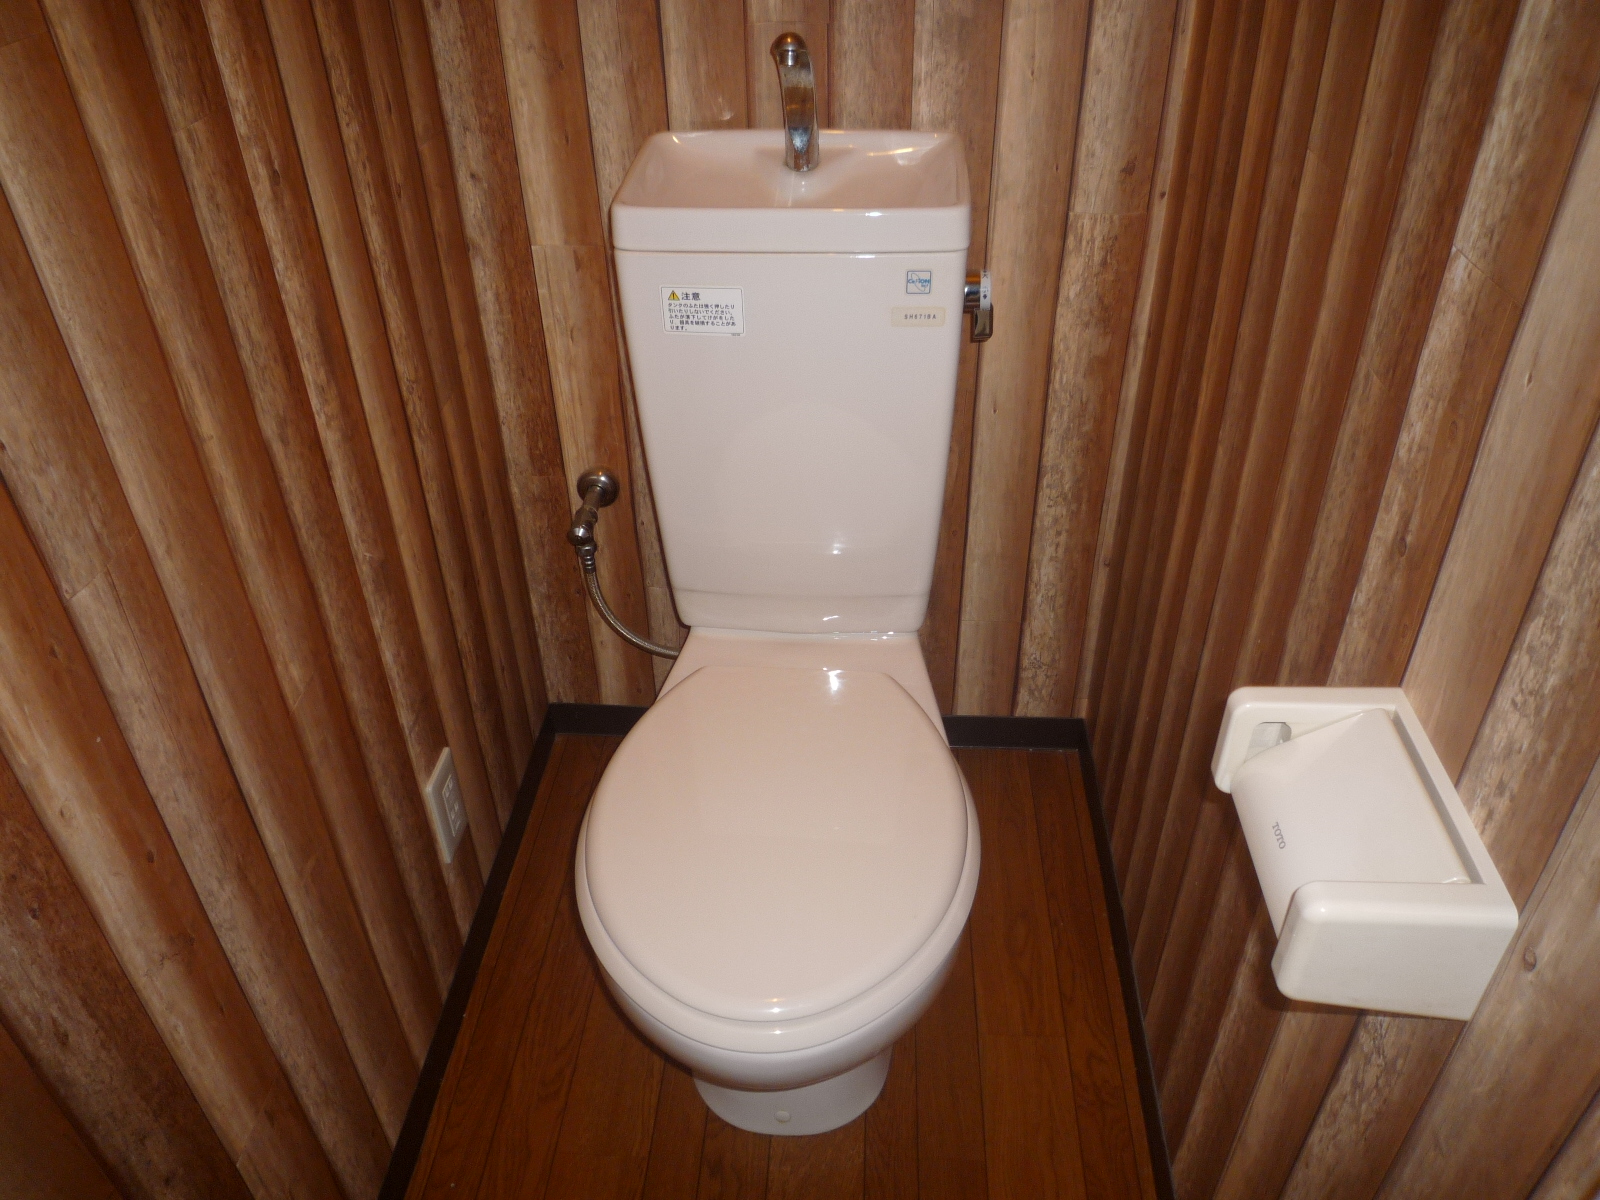 Toilet. Owner., In builders, Handmade feeling full, It finished in the clean